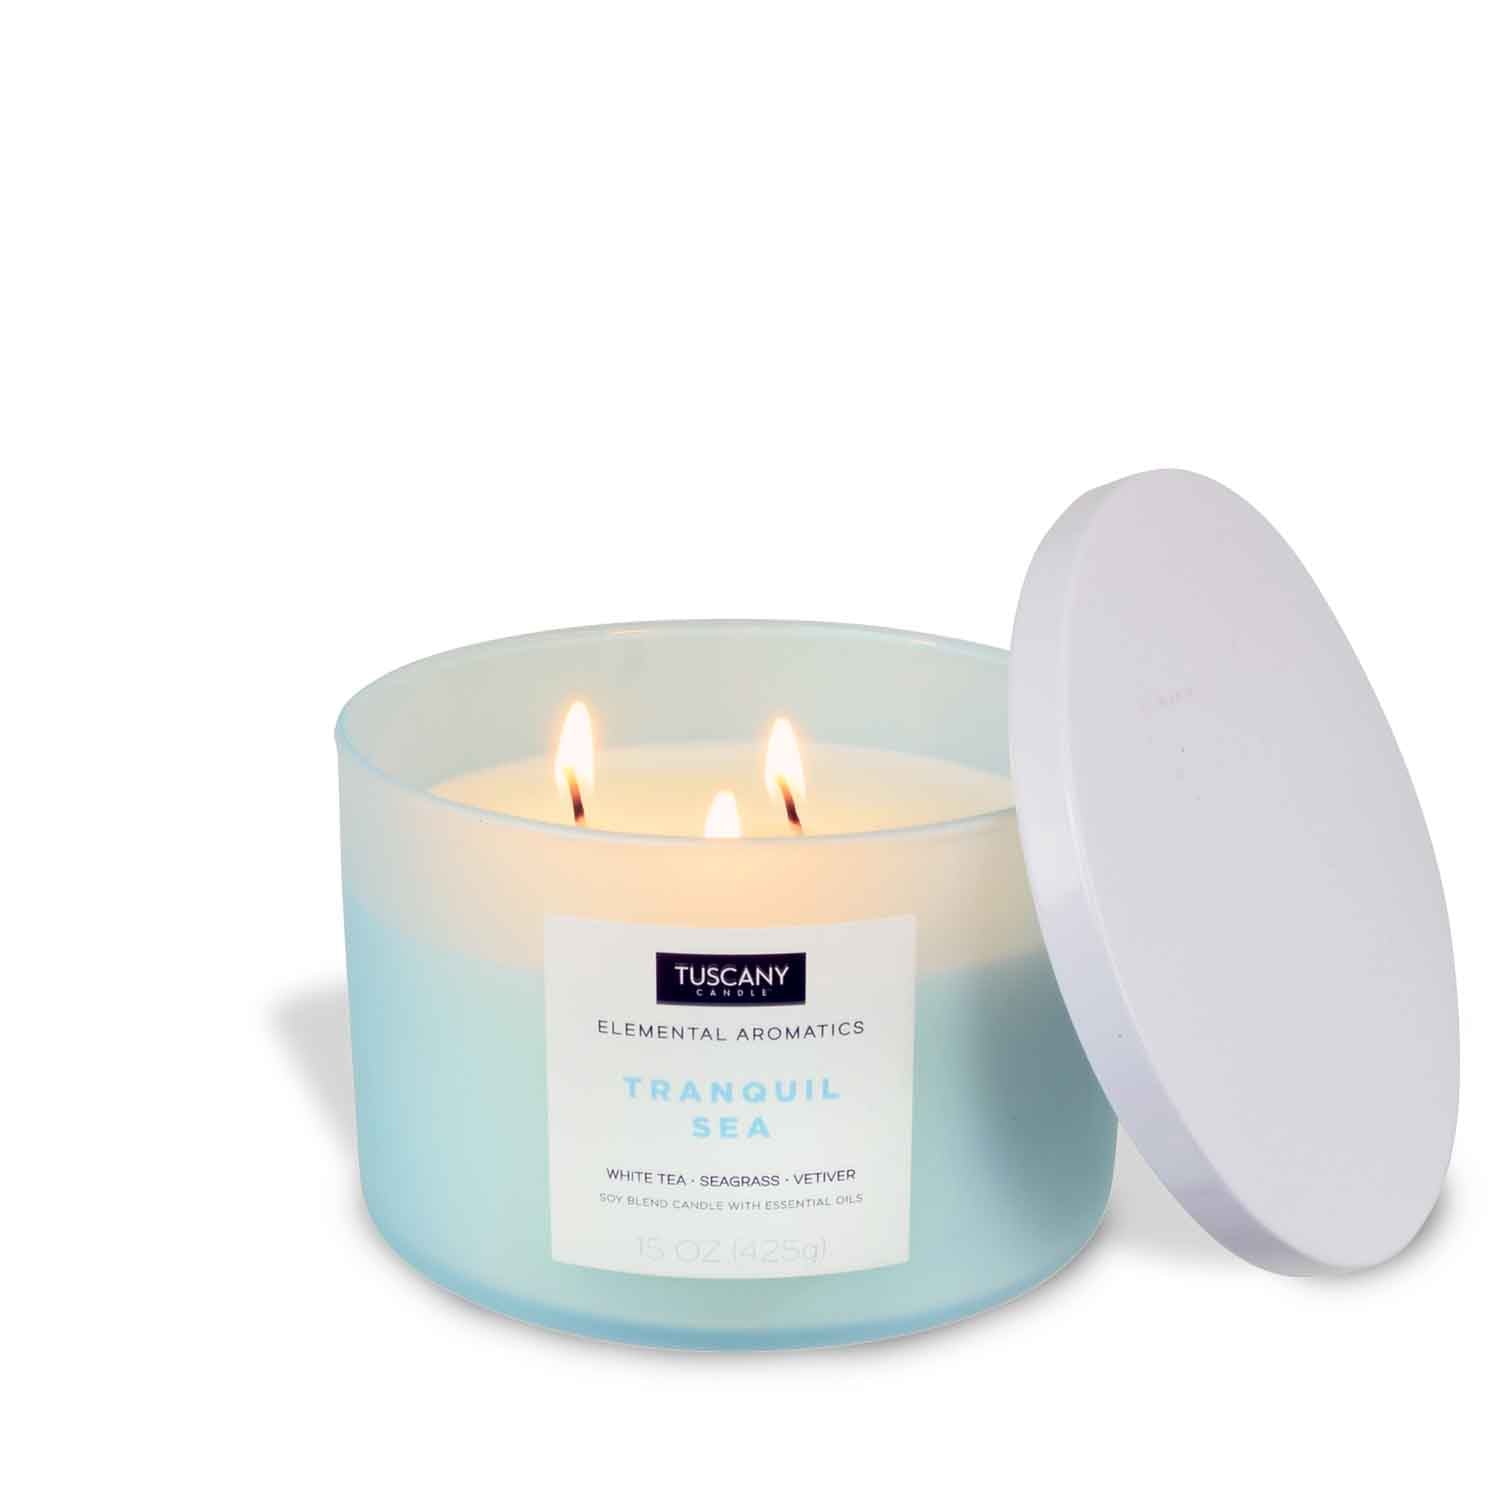 A Tranquil Sea scented candle with a white lid on an ocean-inspired white surface, from the Tuscany Candle® EVD brand.